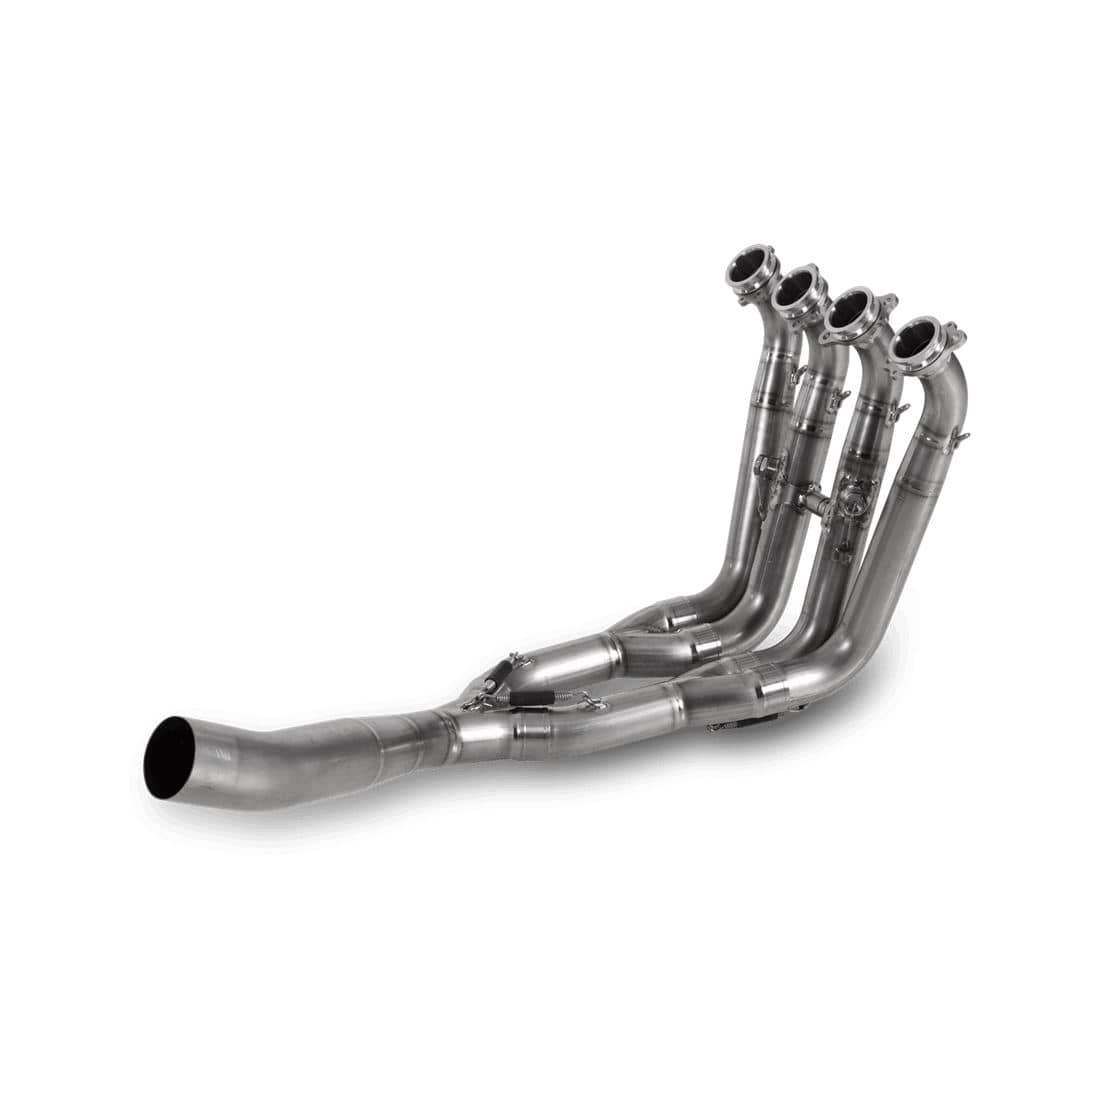 Akrapovic Exhaust Stainless Racing Header Set BMW S 1000 RR 2015-2016